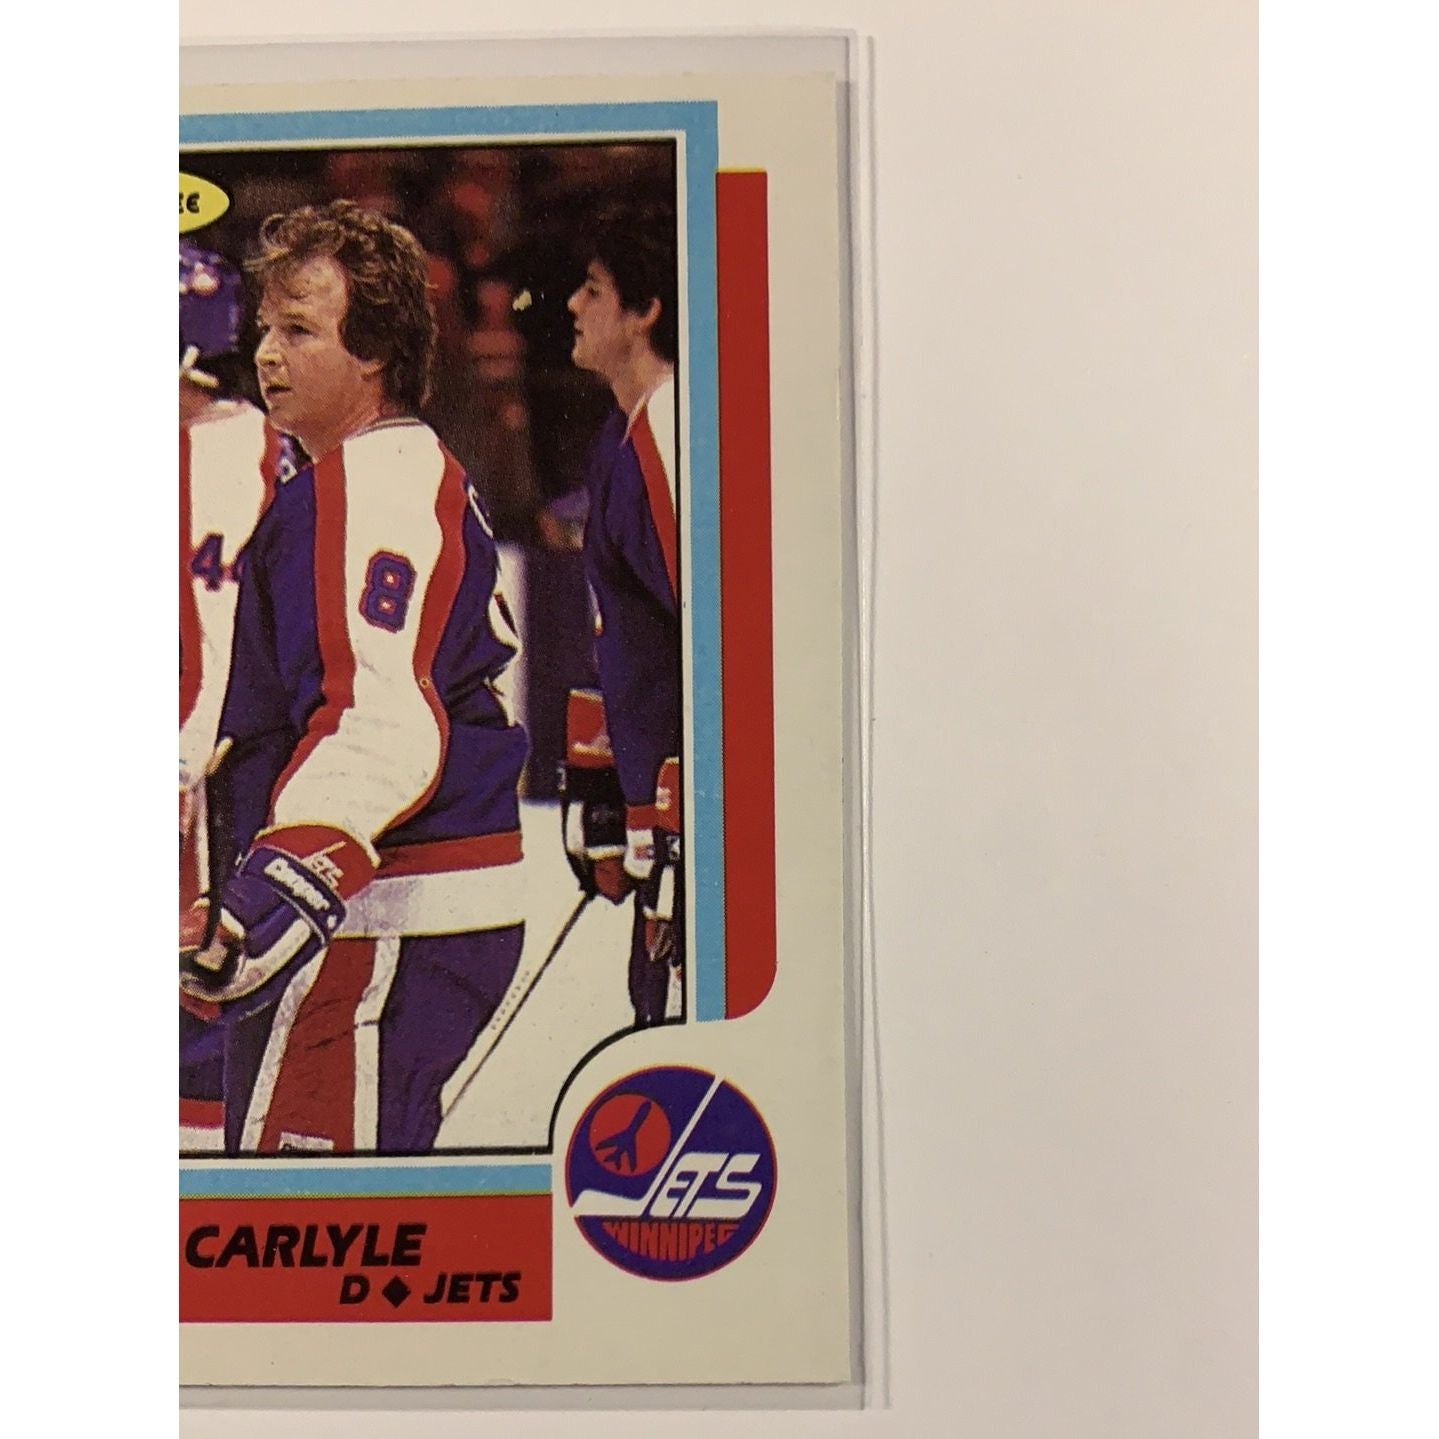  1986-87 O-Pee-Chee Randy Carlyle base #144  Local Legends Cards & Collectibles